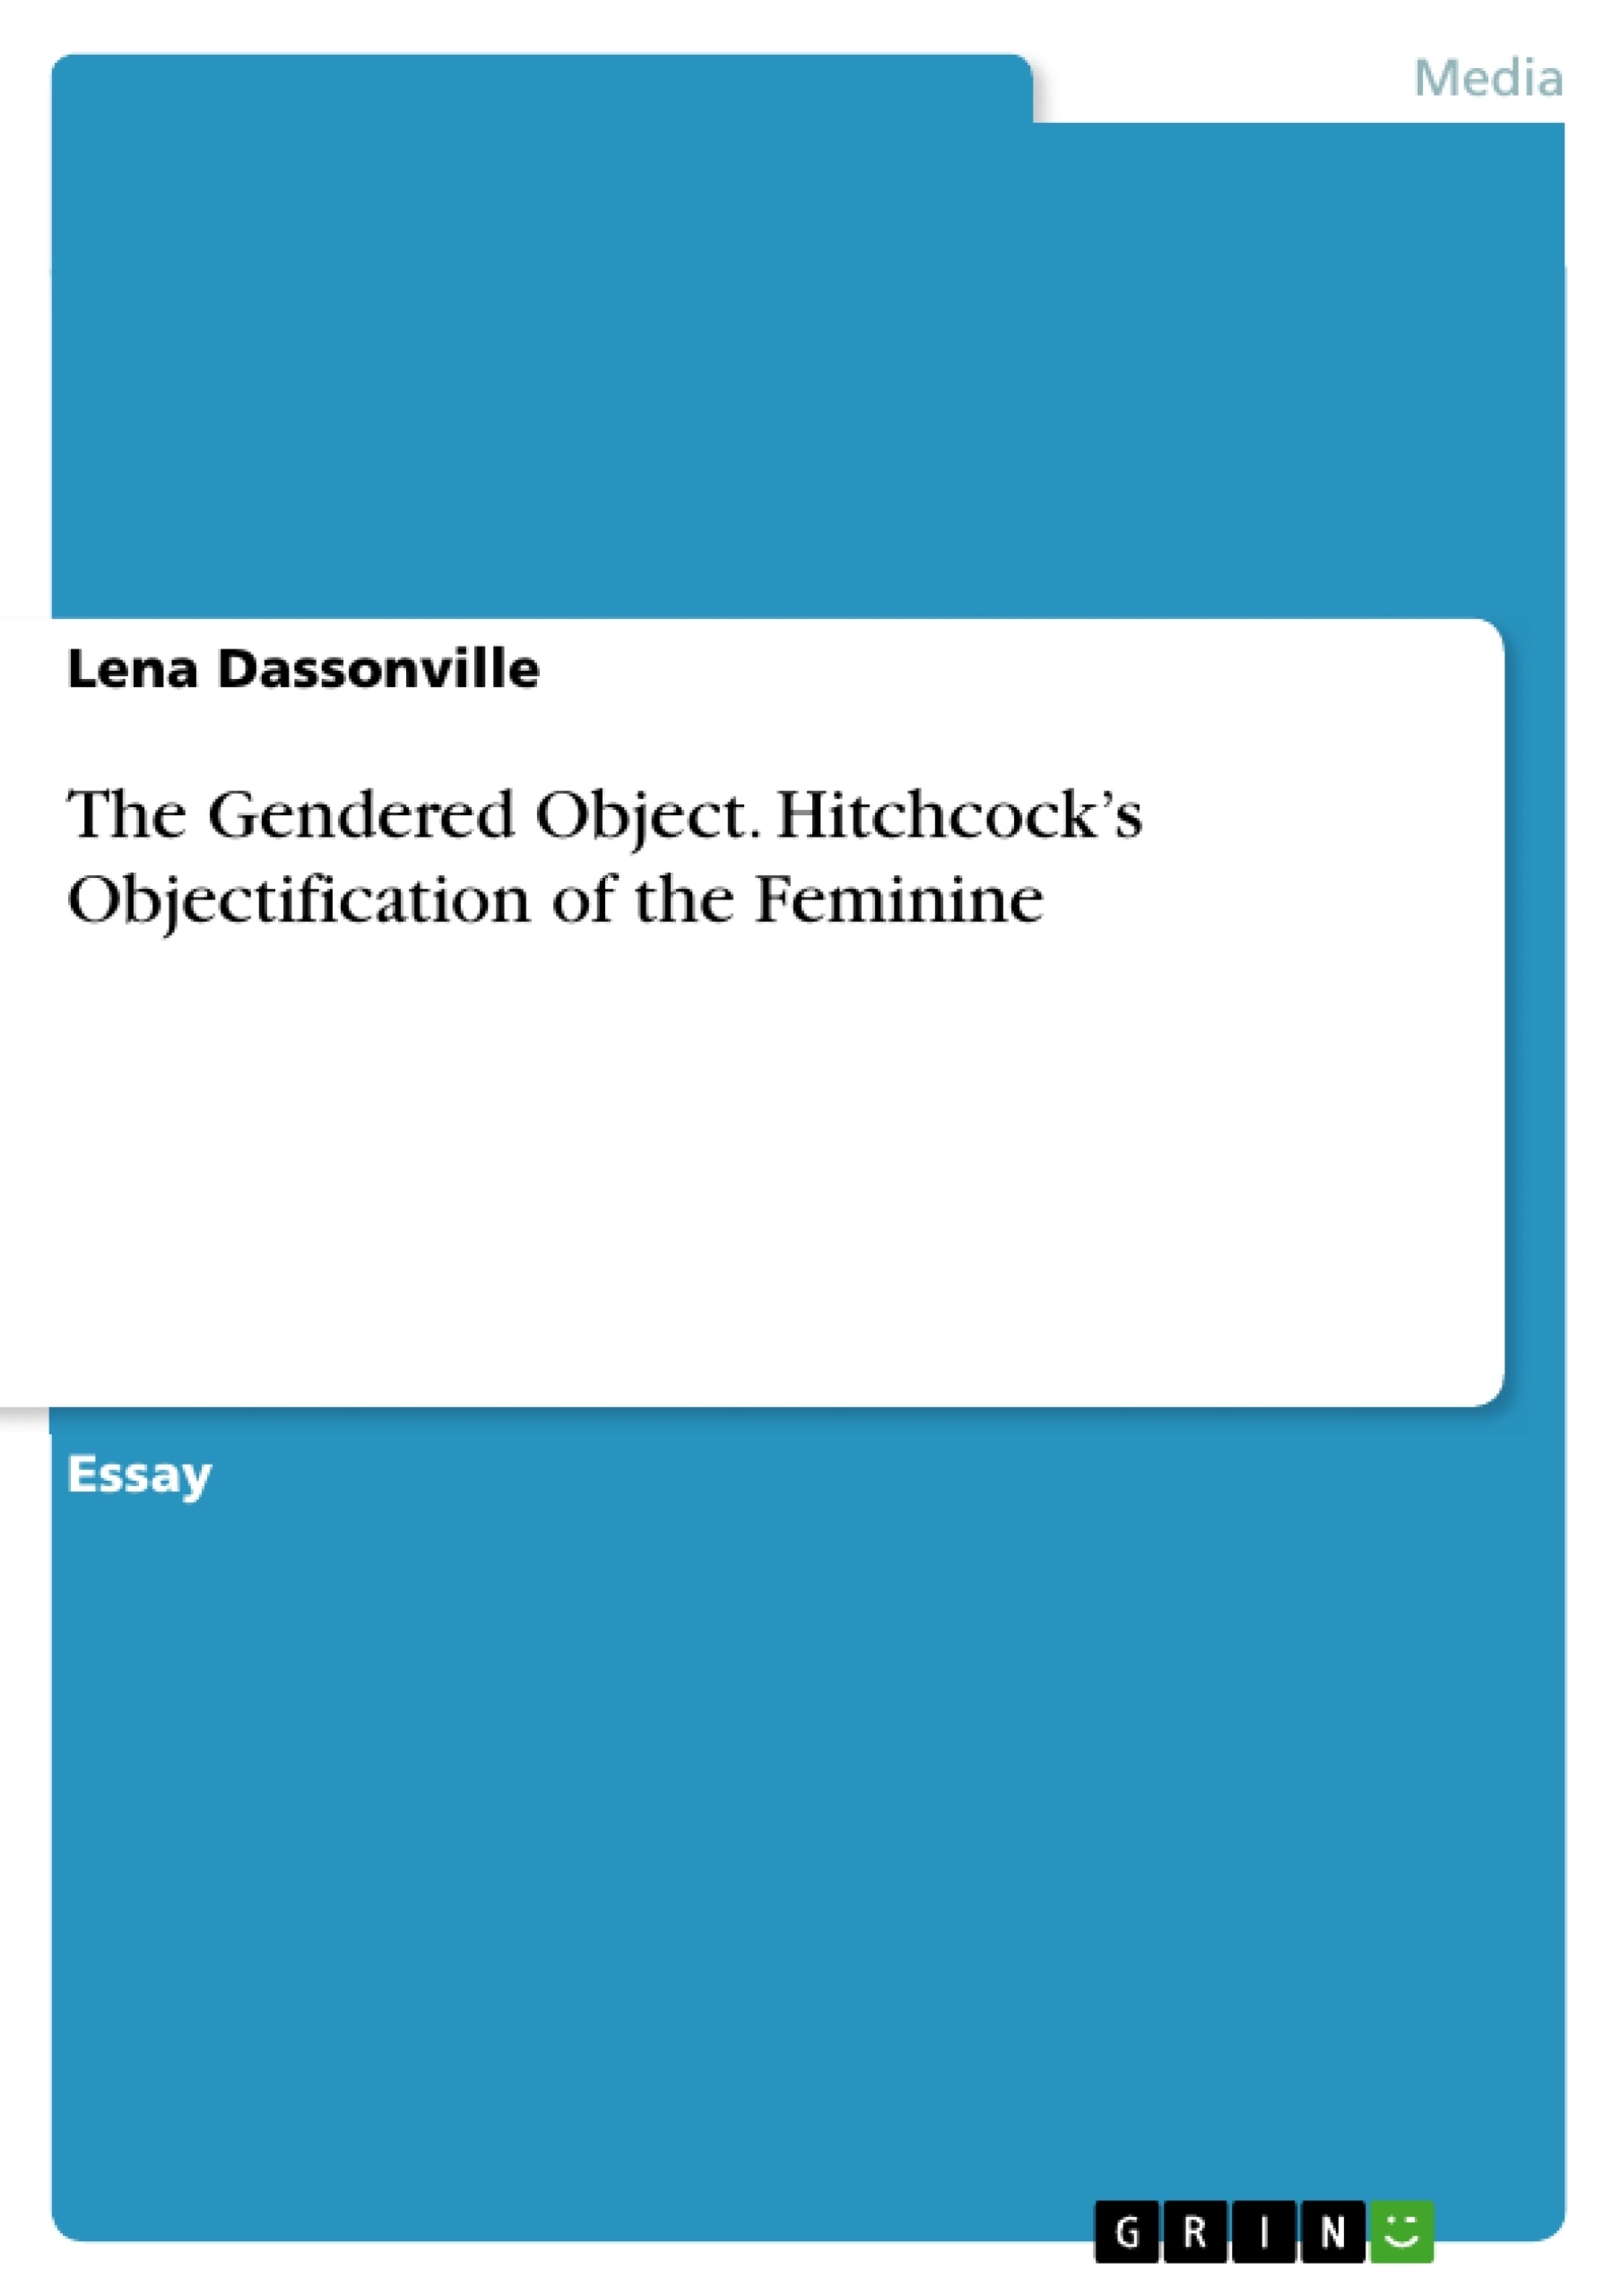 Titre: The Gendered Object. Hitchcock’s Objectification of the Feminine